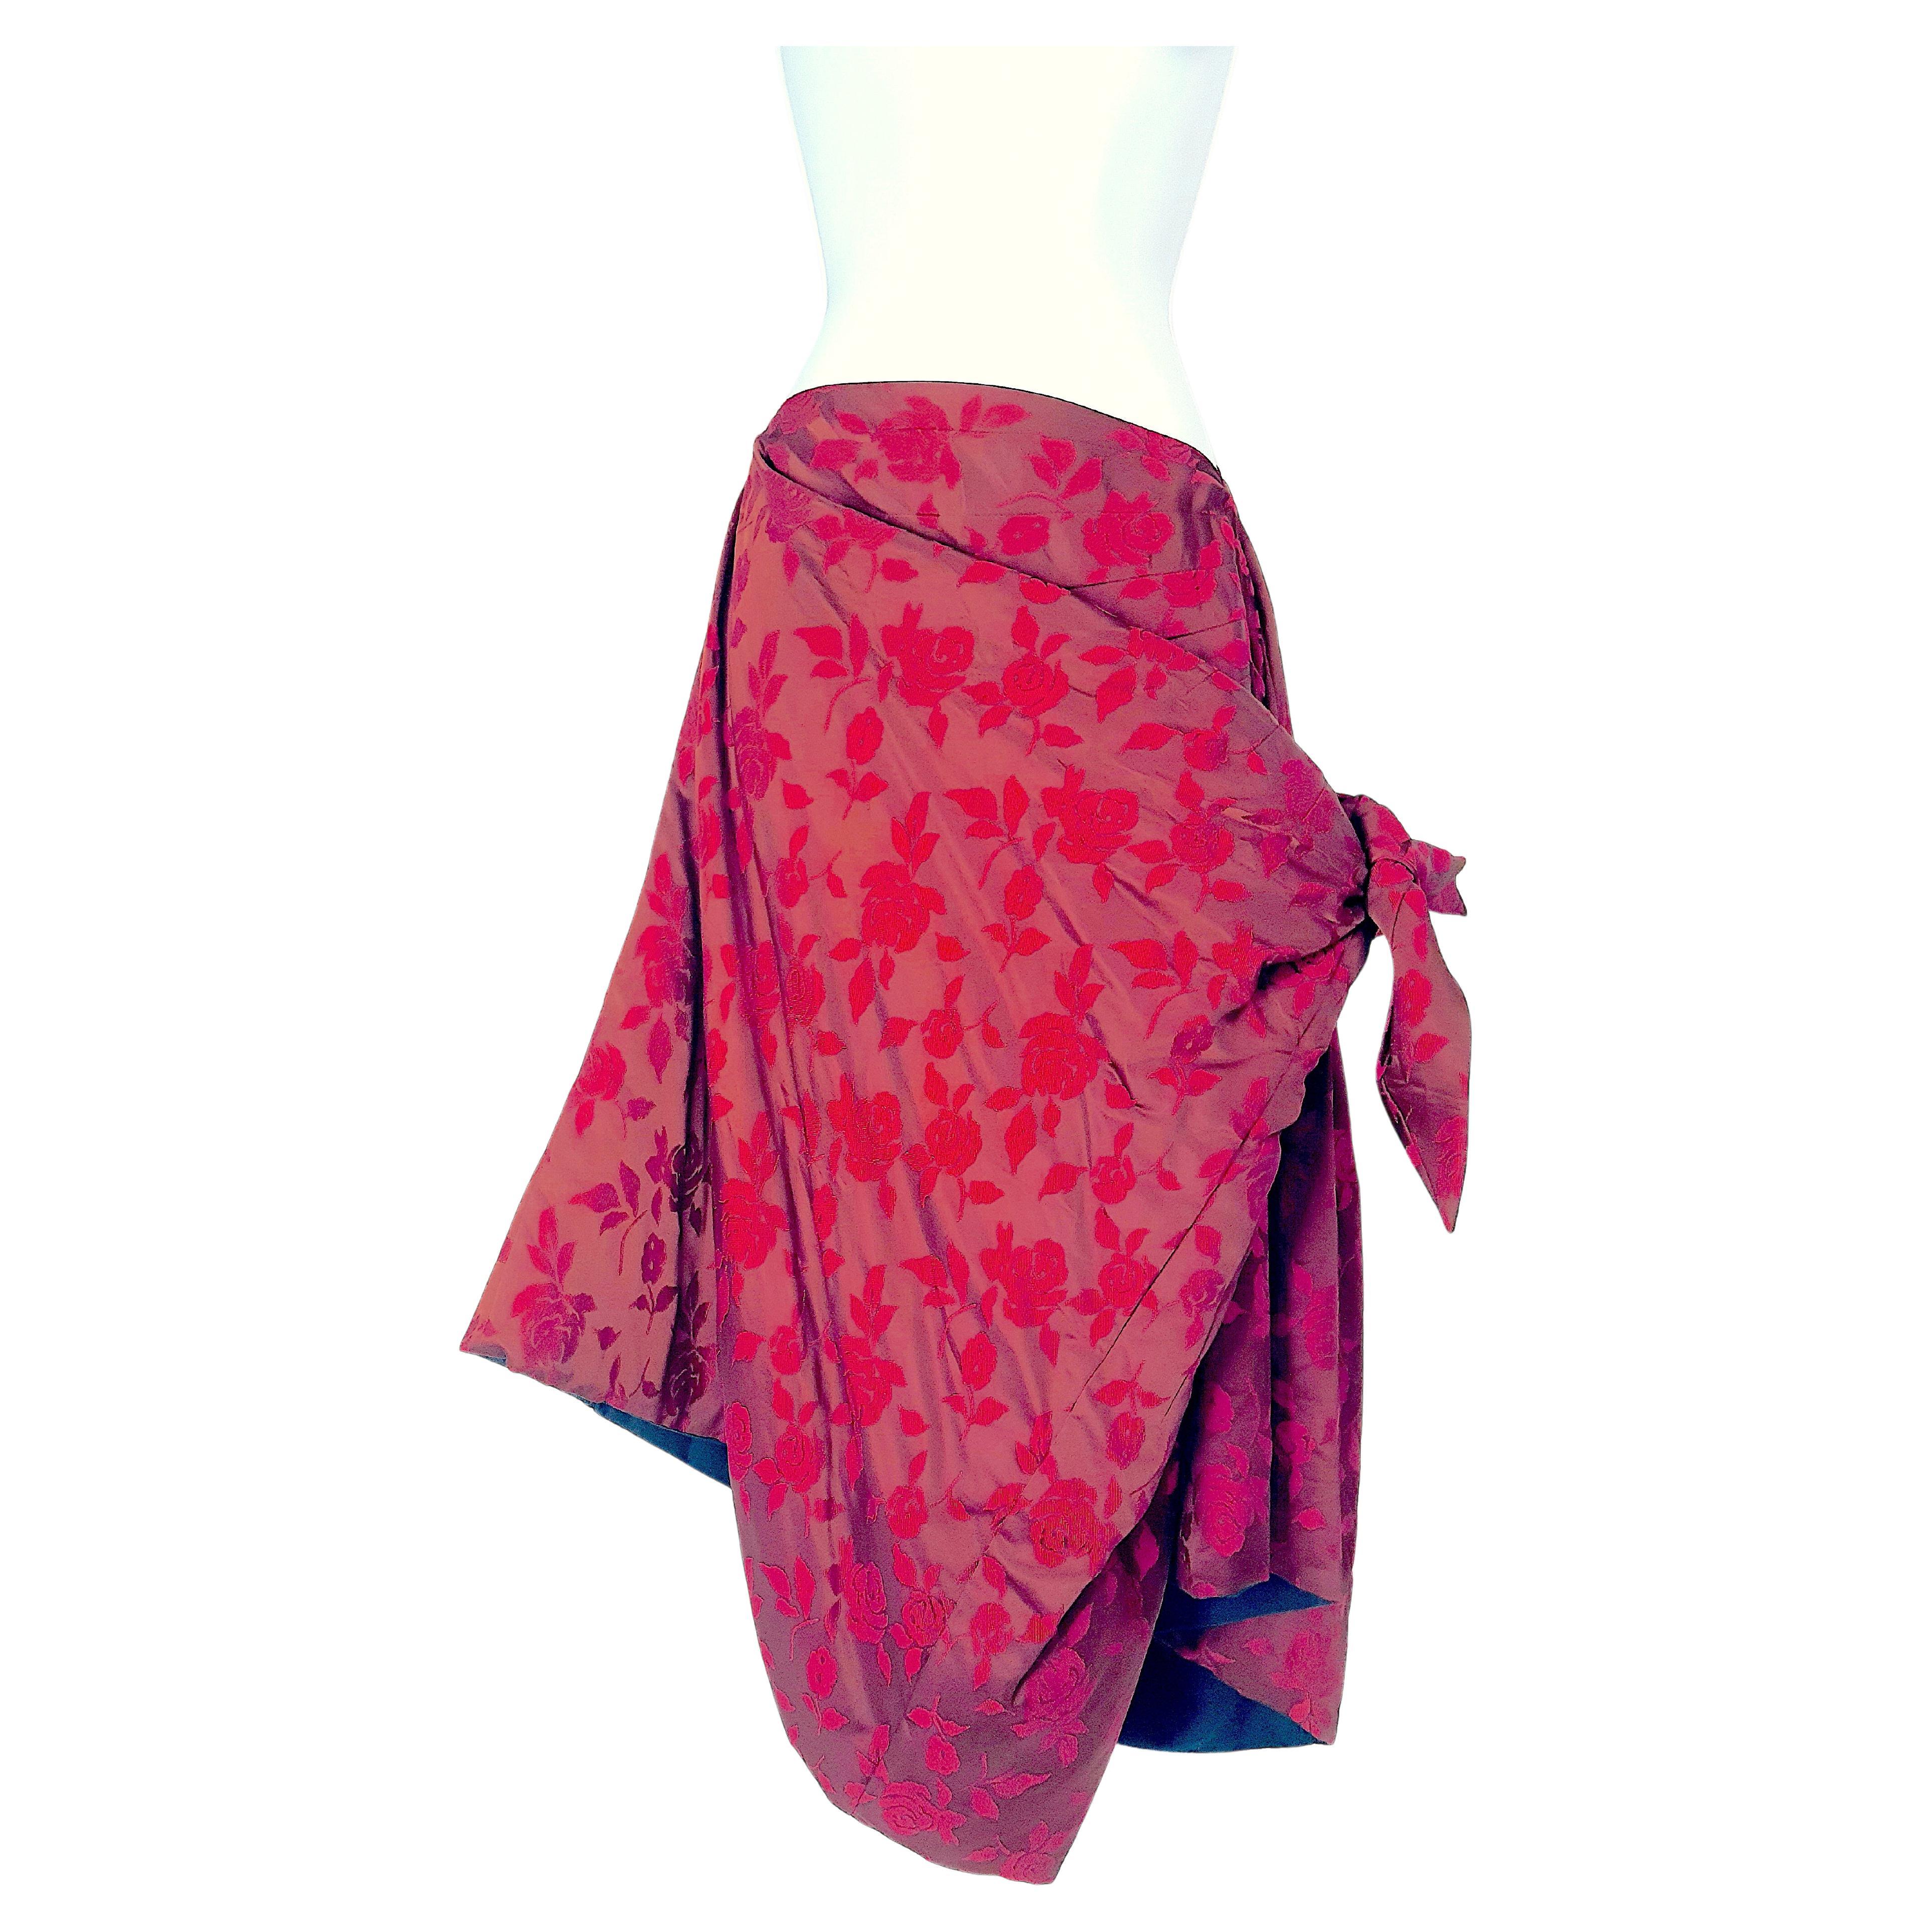 In 1996, Japanese Junya Wantanabe made this sculptural red whorled-rose jacquard padded evening coat/jacket cape to convert to an equally stunning asymmetrical A-line or symmetrical narrow skirt, while he was being groomed in the mid-1990s as a